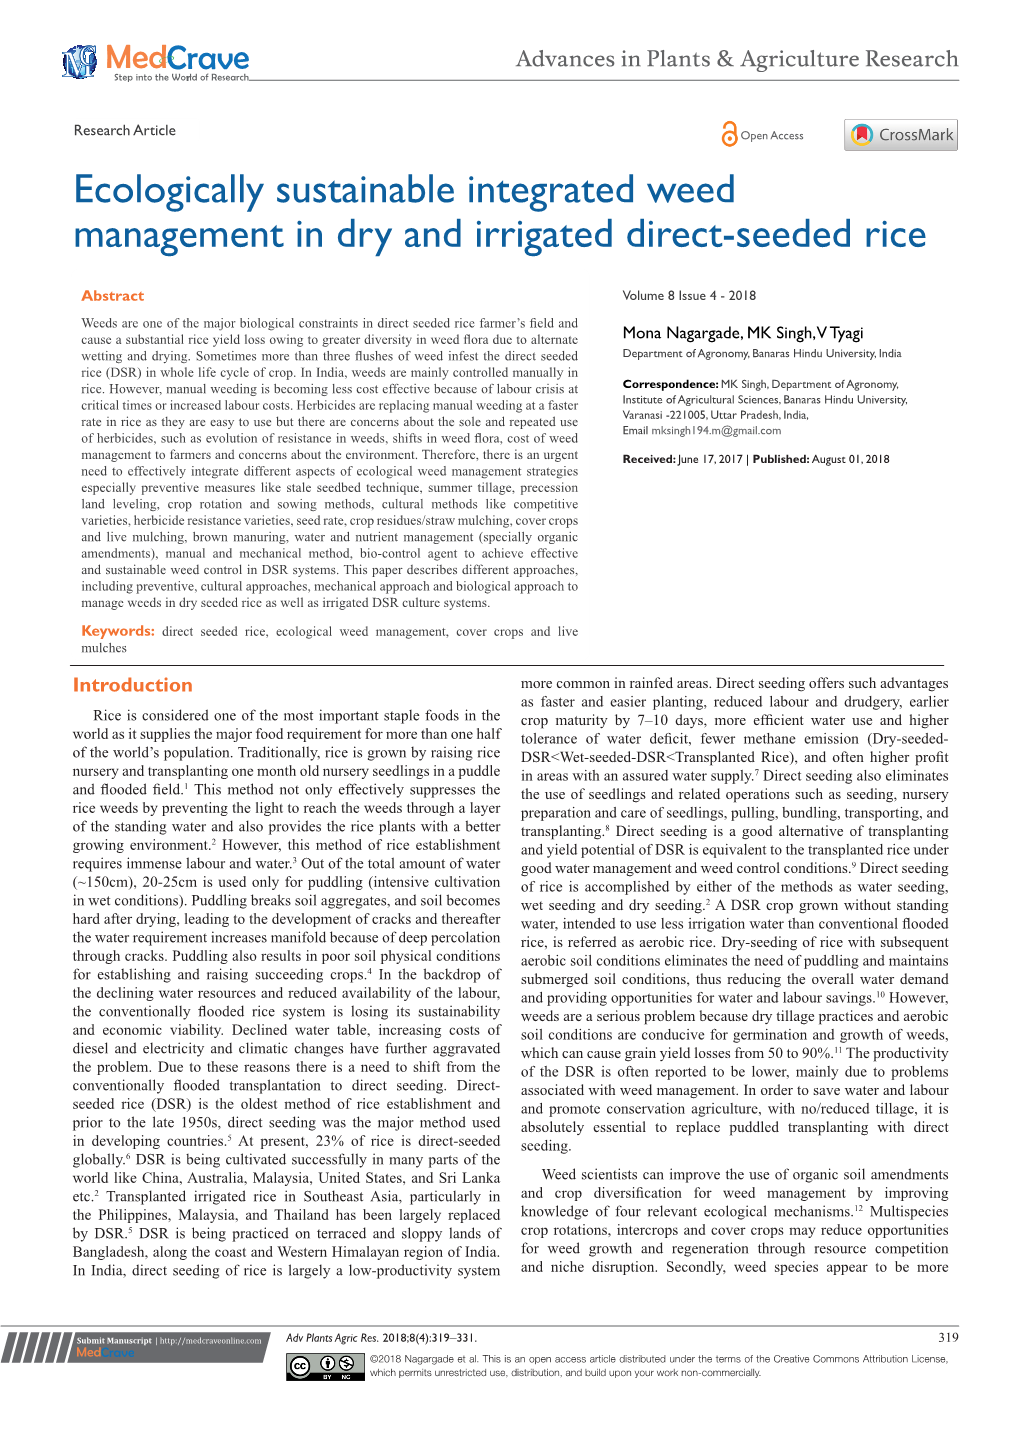 Ecologically Sustainable Integrated Weed Management in Dry and Irrigated Direct-Seeded Rice